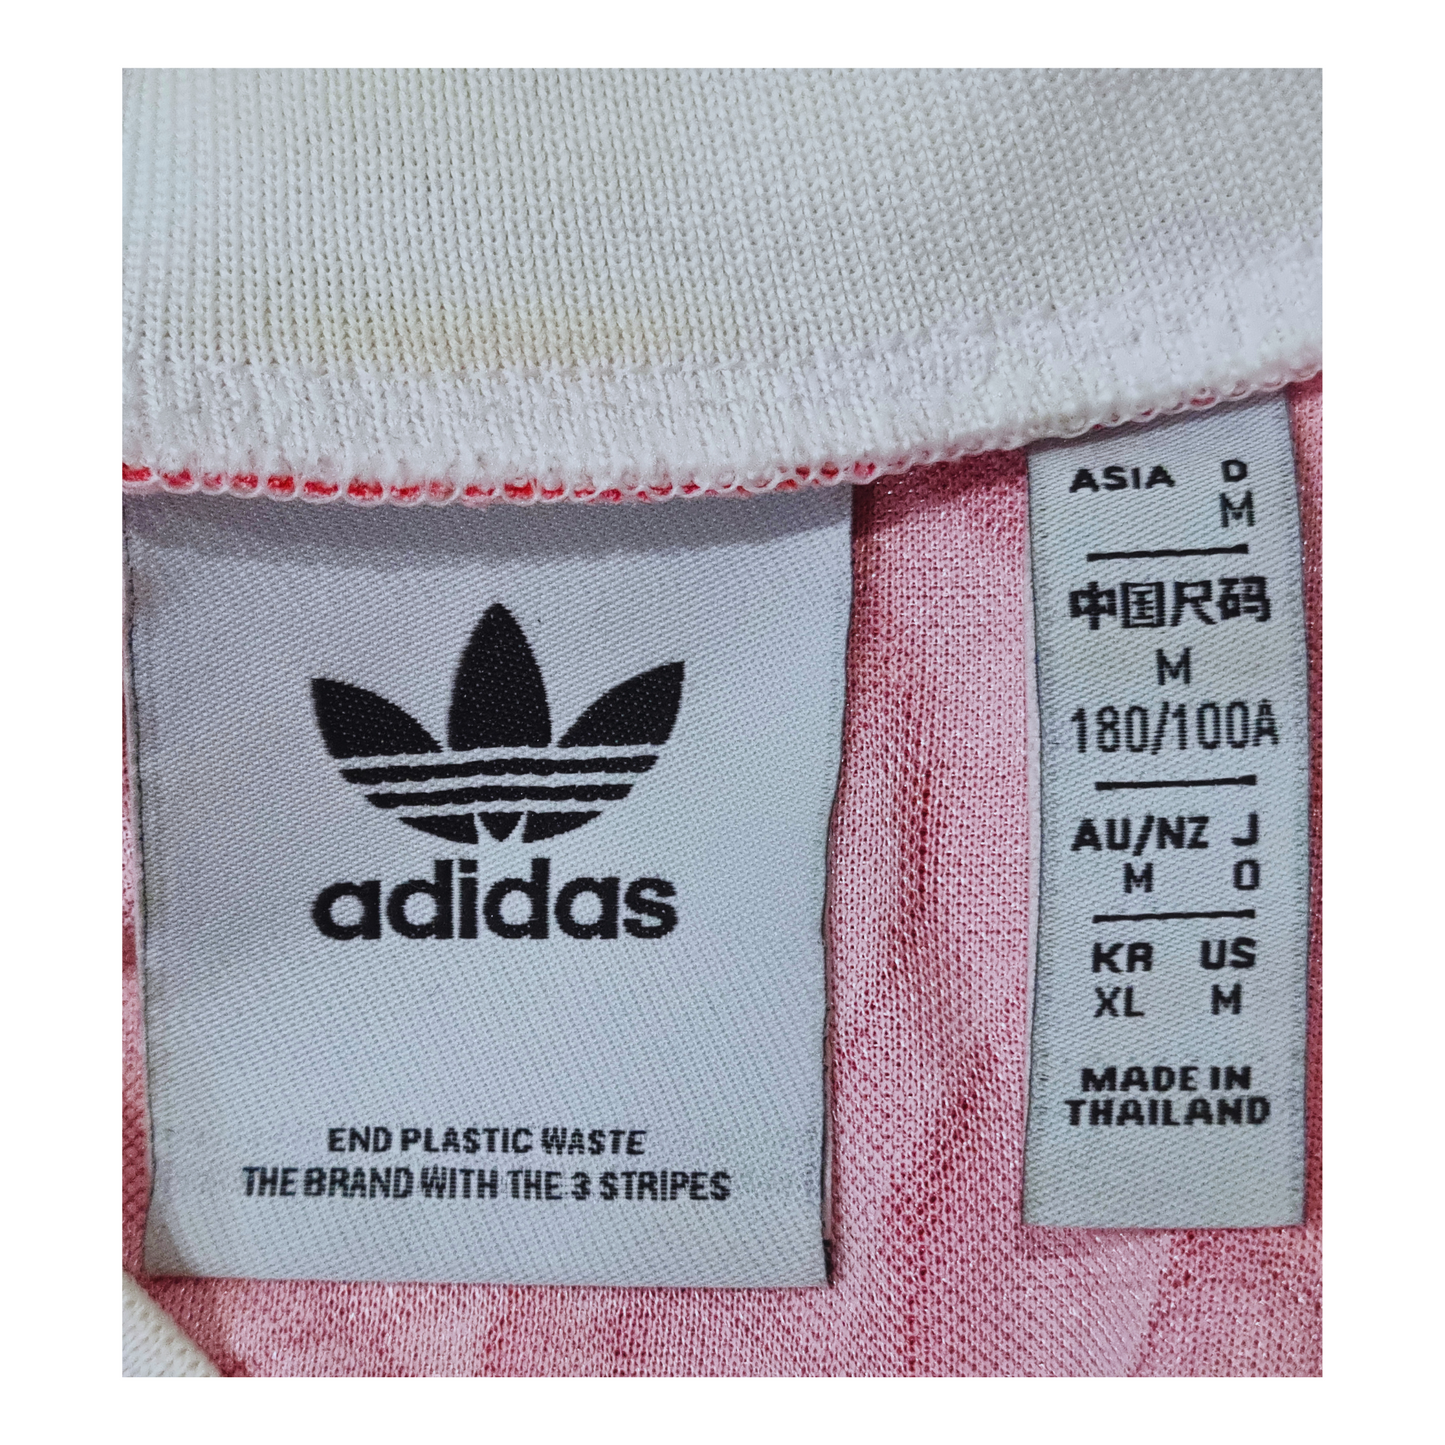 A pink Adidas Manchester United 1991/92 Home Jersey Re-release with a label on it.